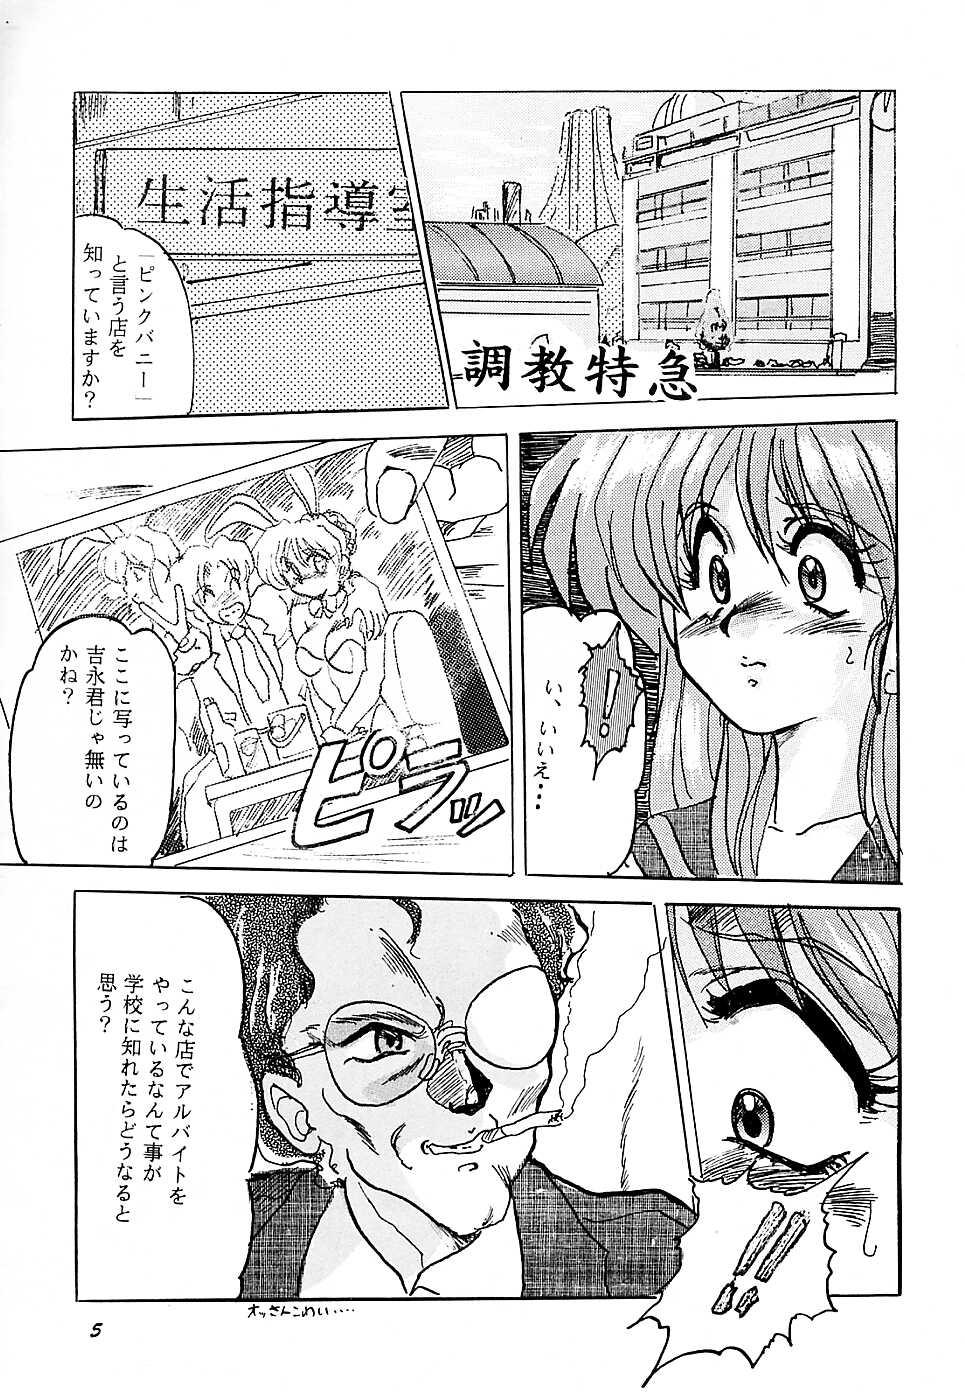 Tesao F 93C - Brave express might gaine Spandex - Page 4